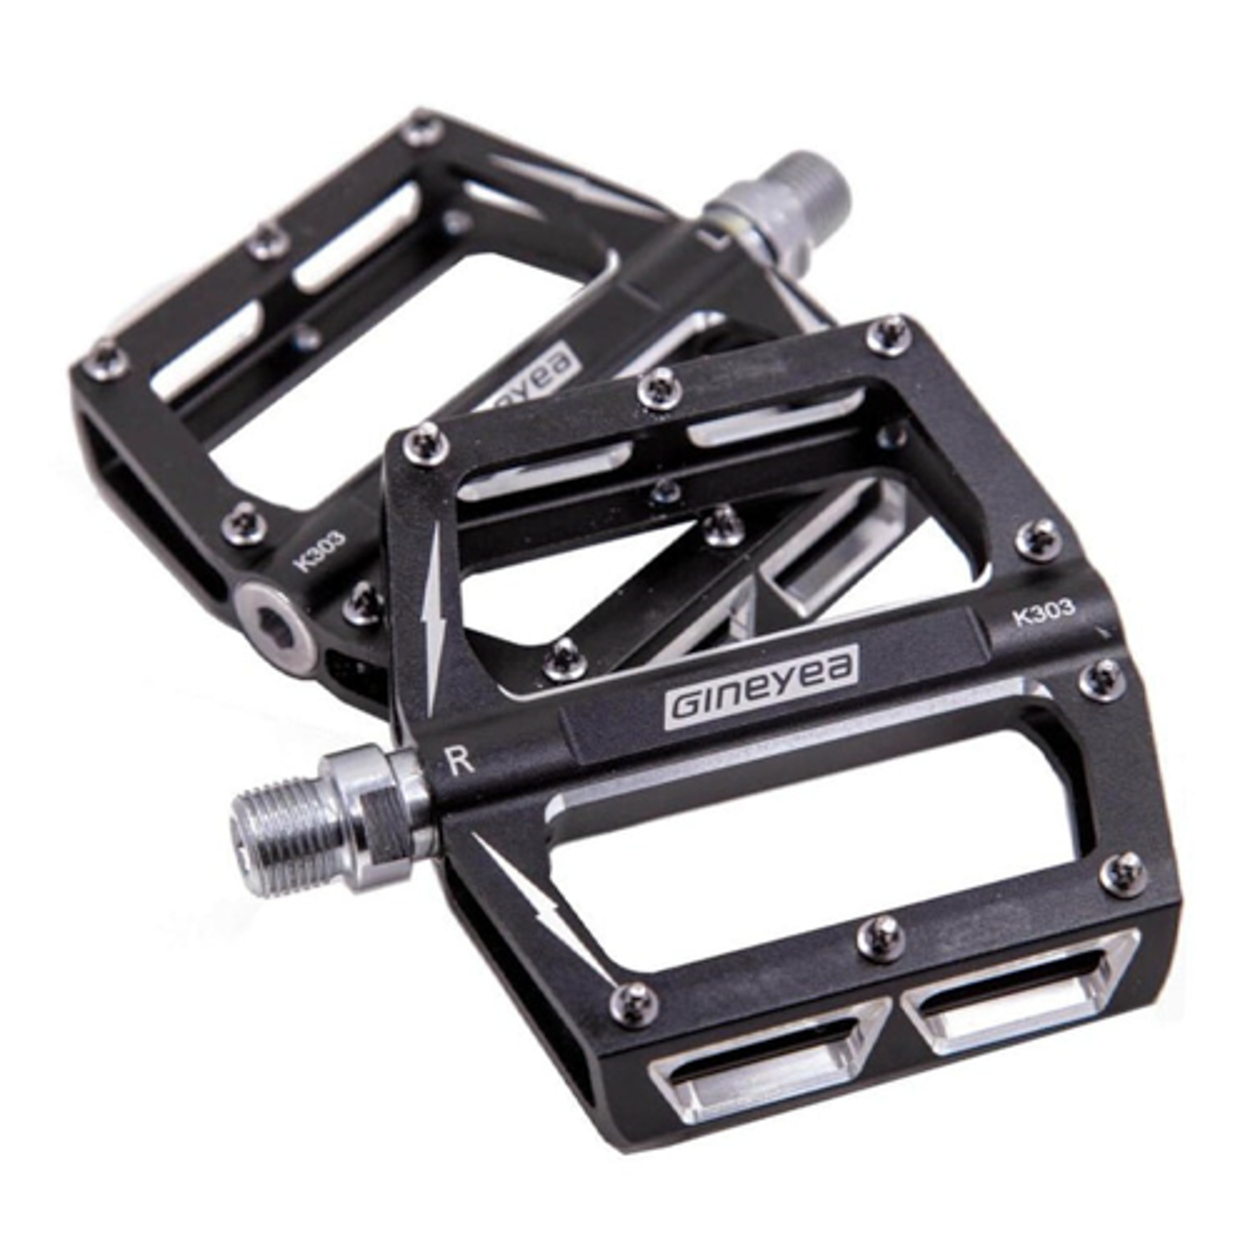 Bakcou Aggressive Skid-Proof Wide Stance Pedals